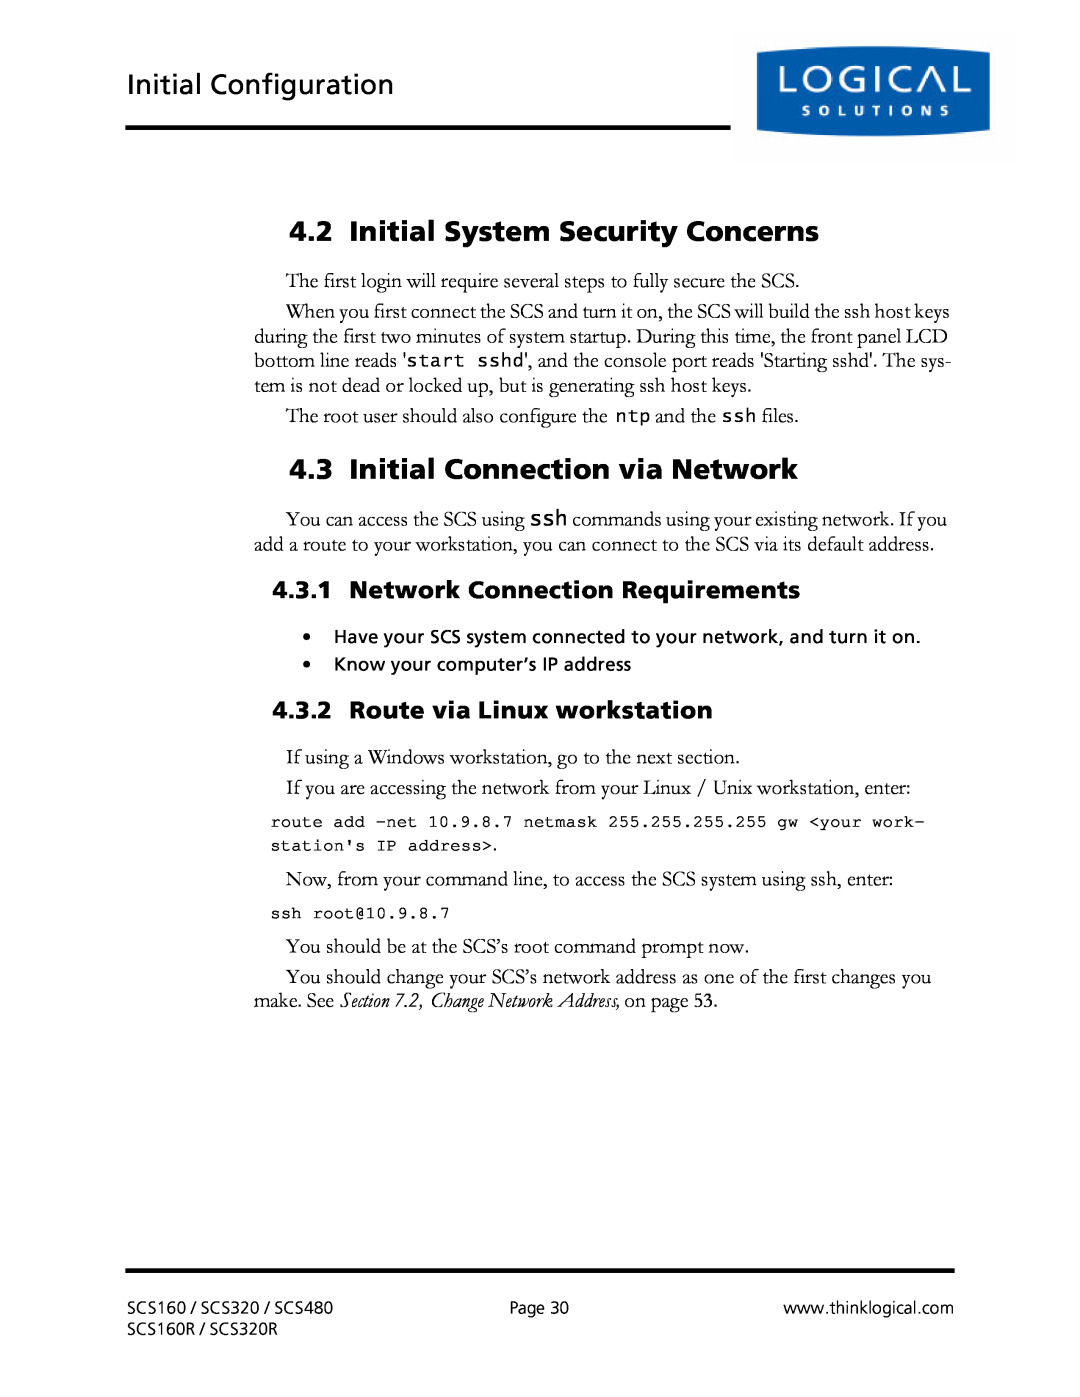 Logical Solutions SCS-R manual Initial Configuration, Initial System Security Concerns, Initial Connection via Network 